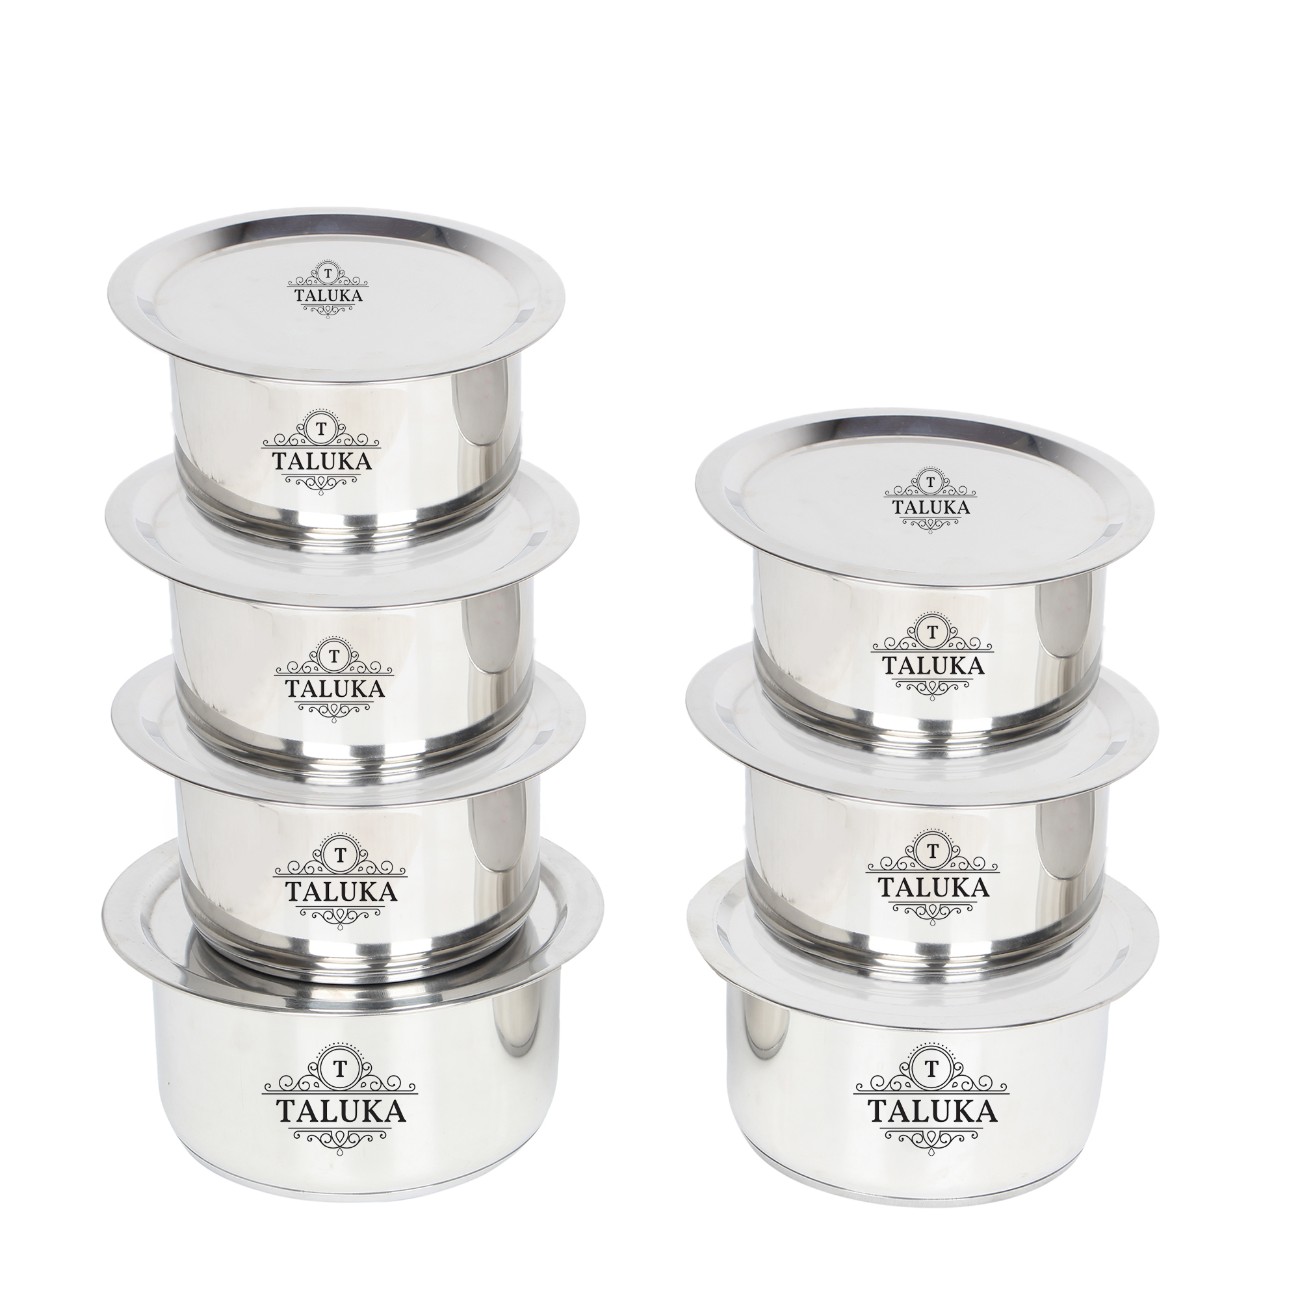 Stainless Steel Induction Friendly Tope Topia / Patila Bhaguna Cooking Set